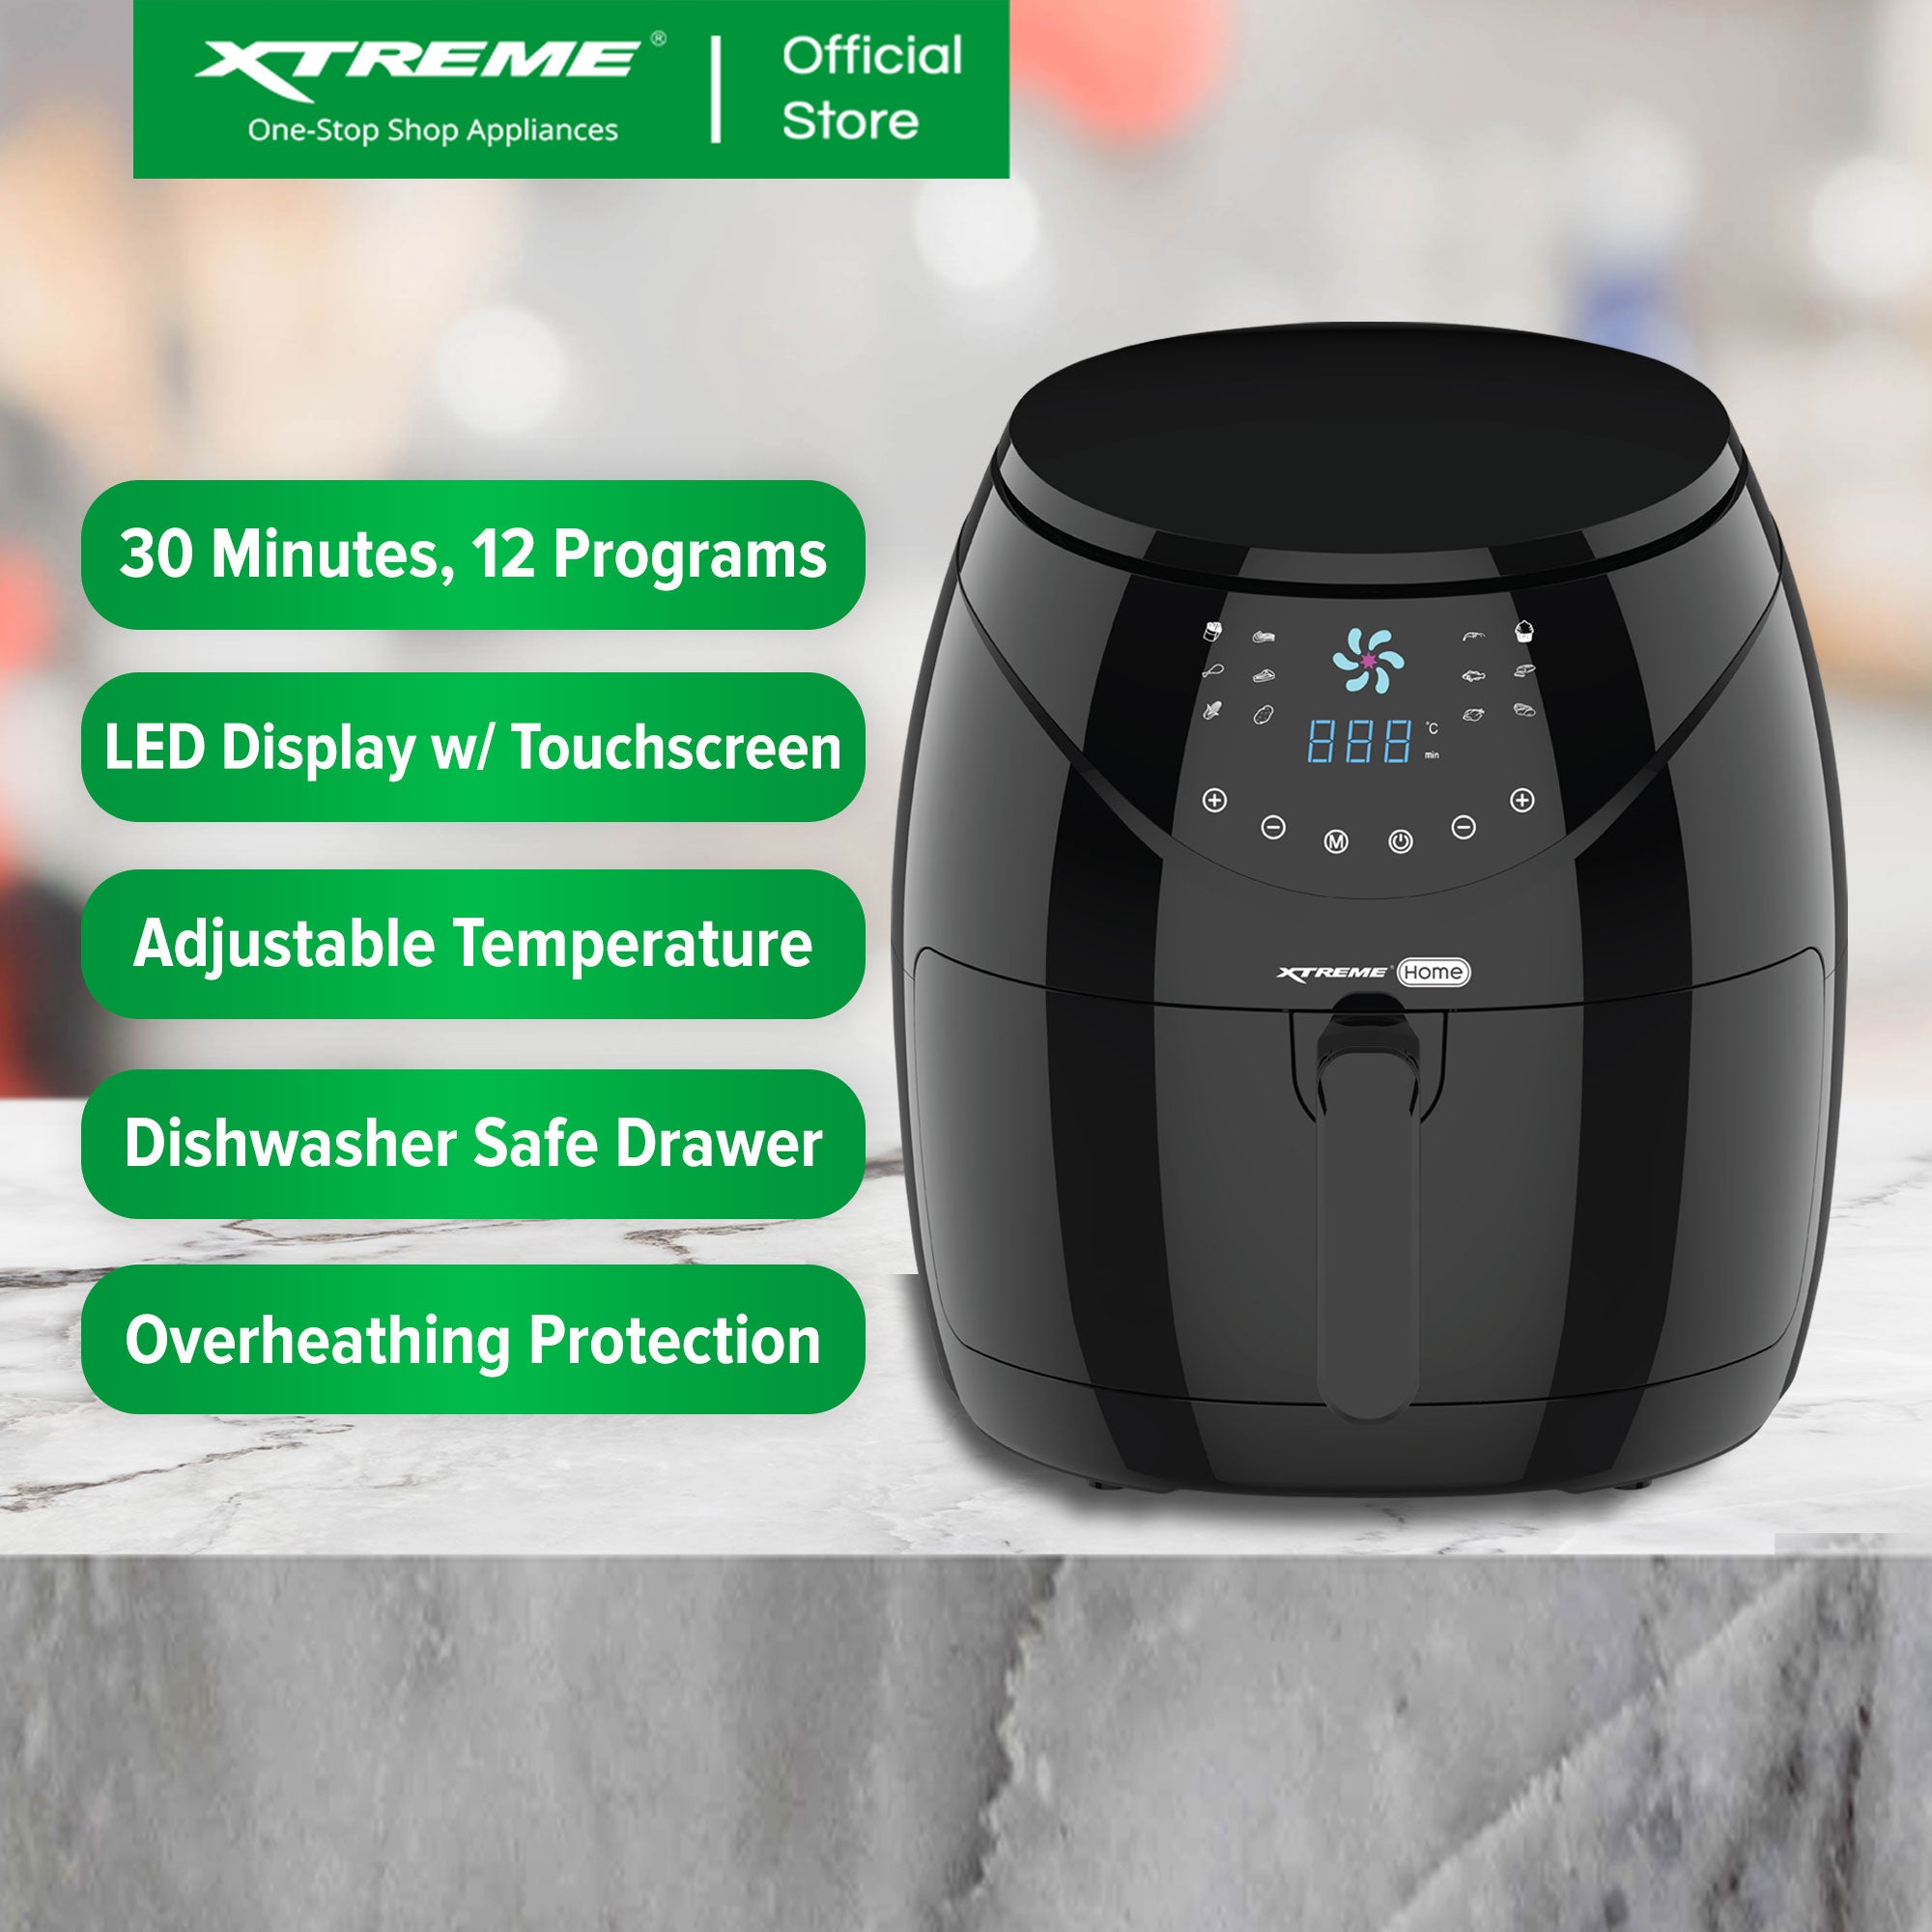 XTREME HOME 6.5L Air Fryer Multi-Function Touchscreen with LED Display (Black) | XH-AIRFRYER65L